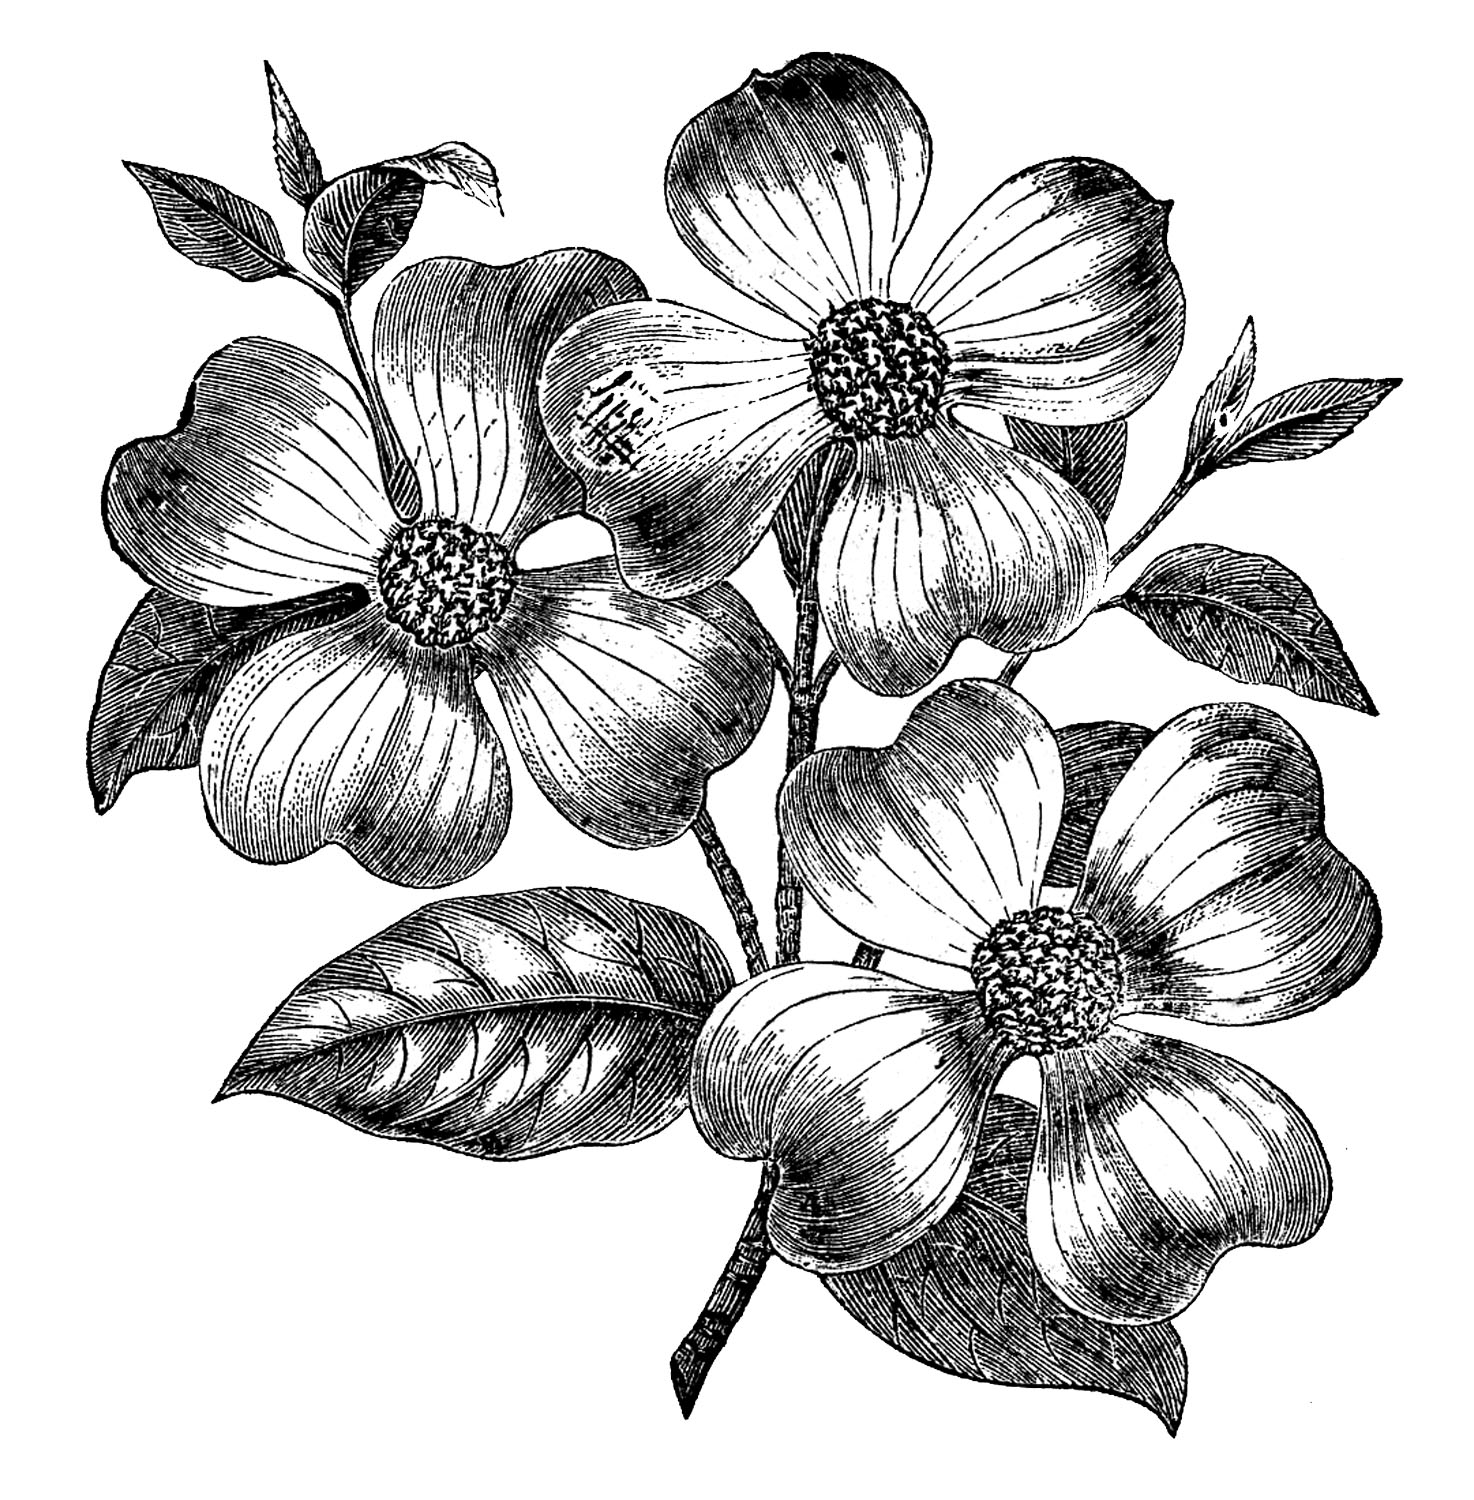 Buy Dogwood Flowers Tattoo Design Online in India  Etsy